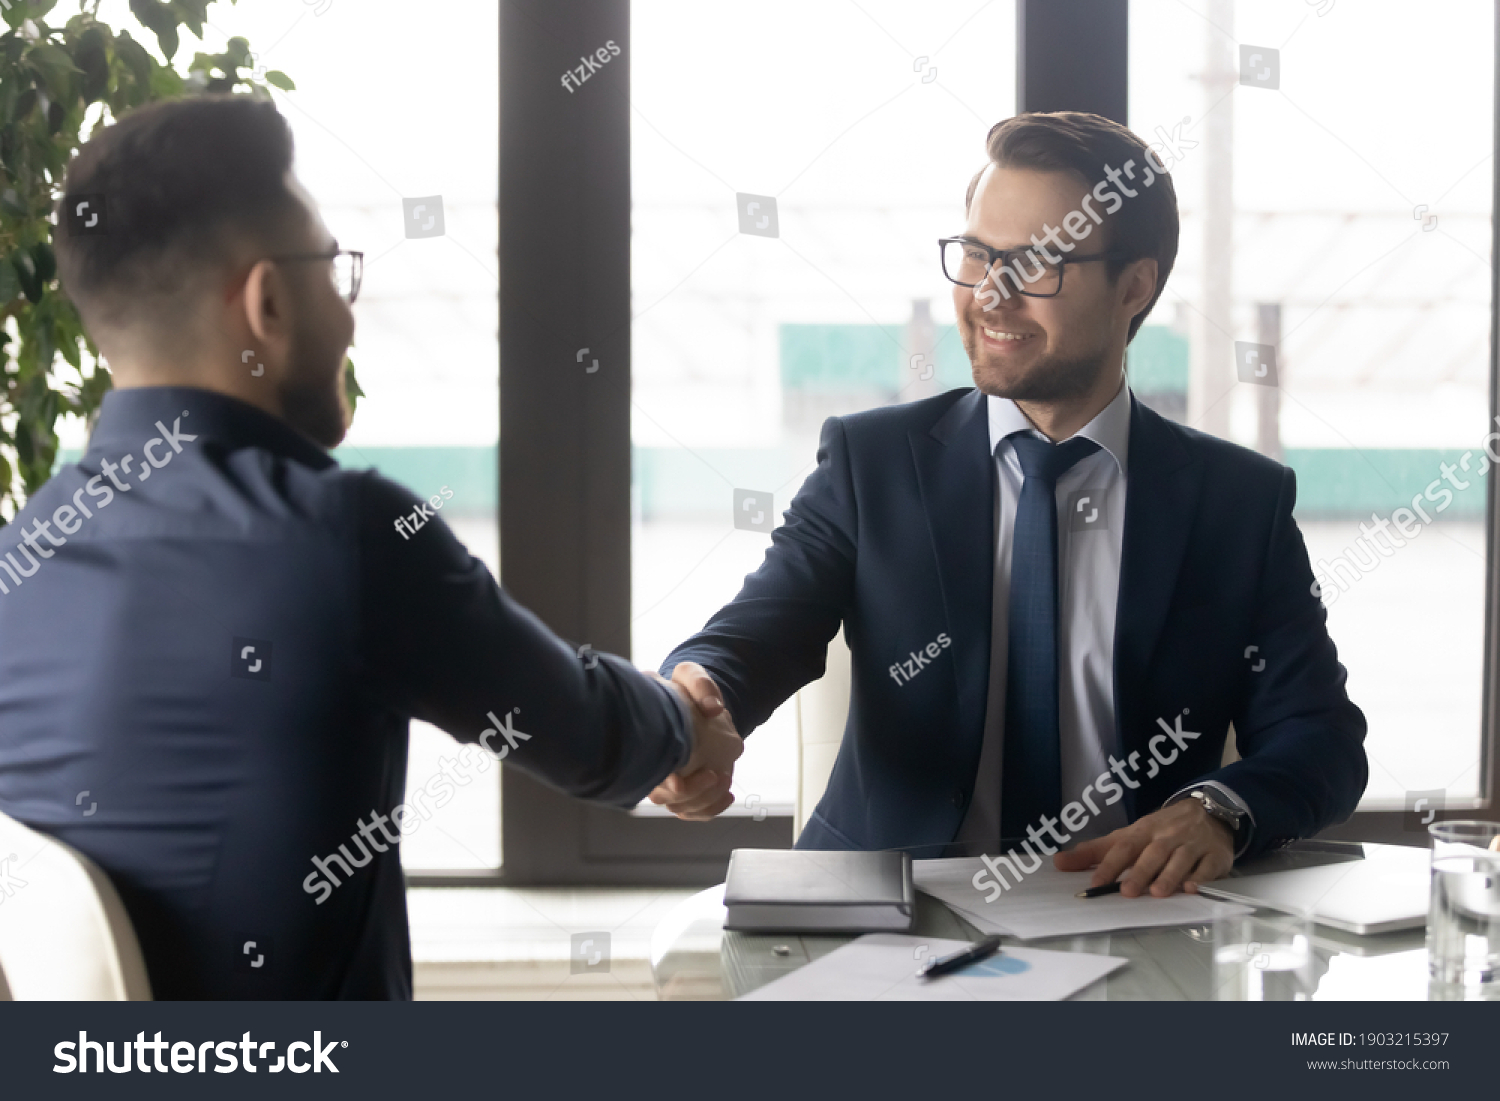 Smiling hr manager shaking hand of successful candidate after interview, Arabian man getting job, diverse business partners handshake, making great deal, agreement, employer greeting new employee #1903215397